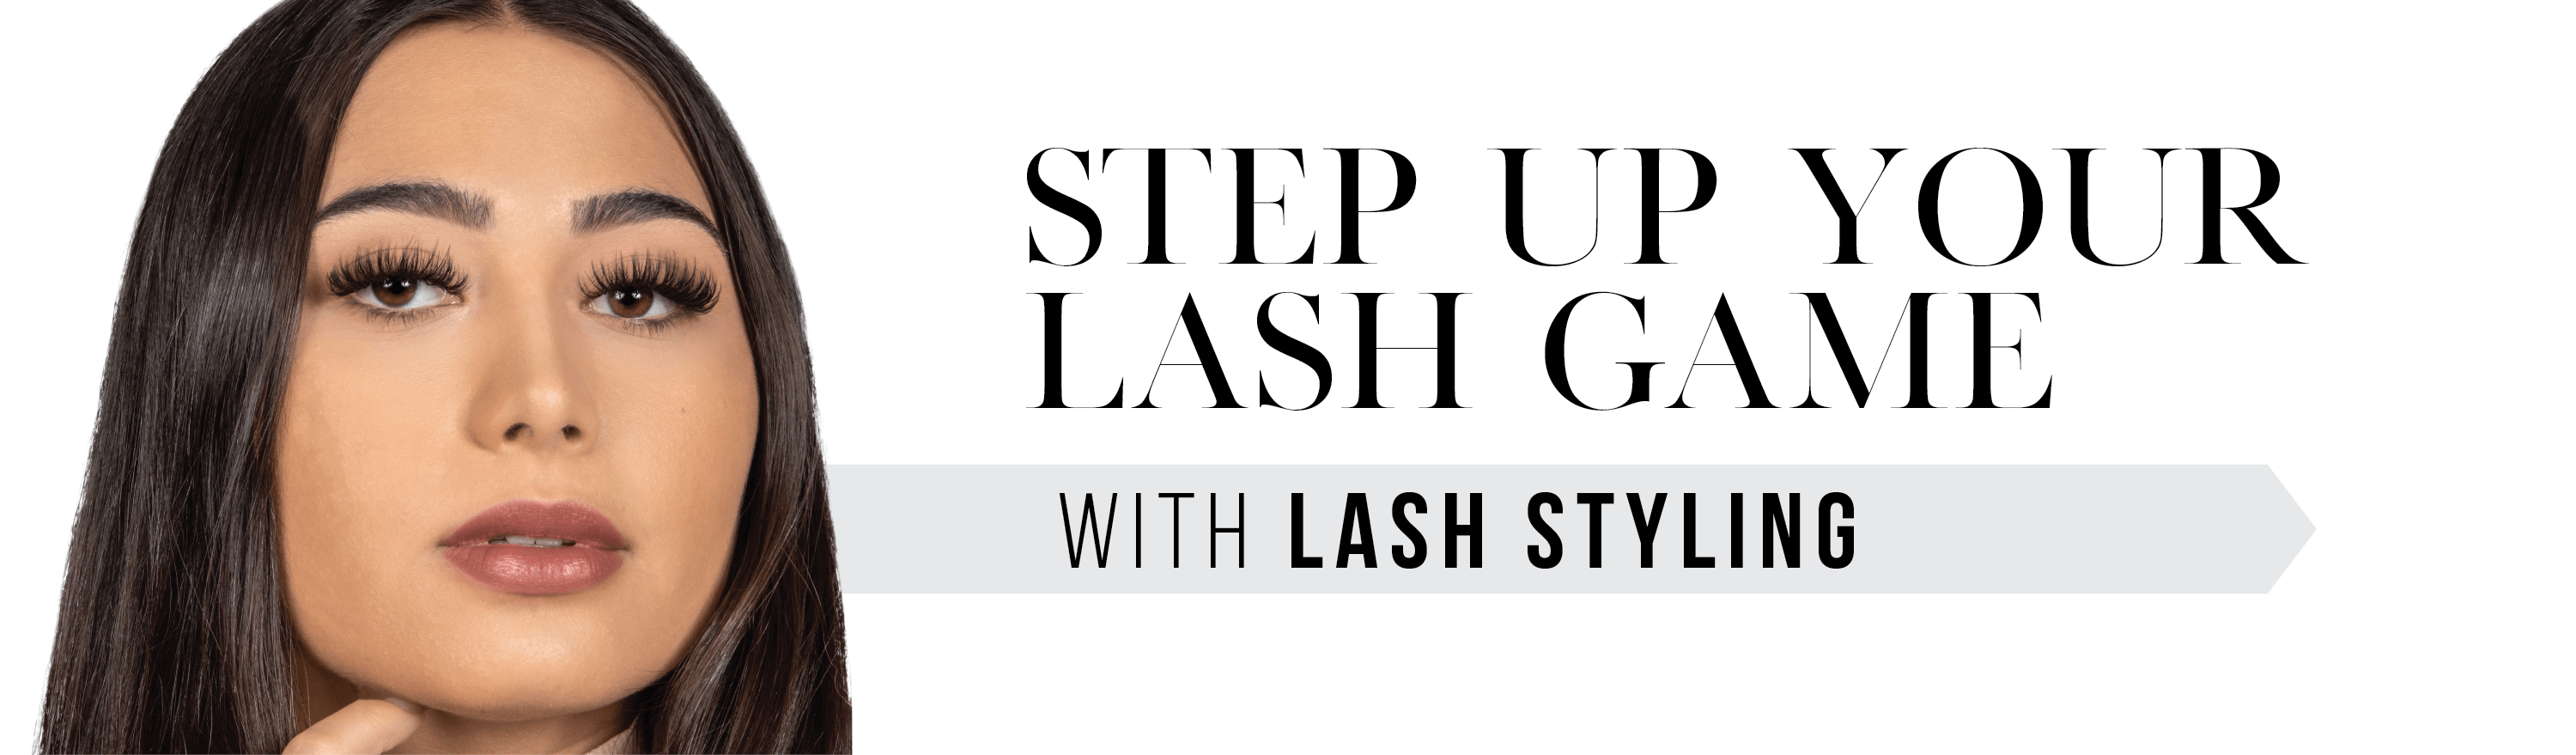 Girl with spike lash style. Step up your lash game with Lash Styling